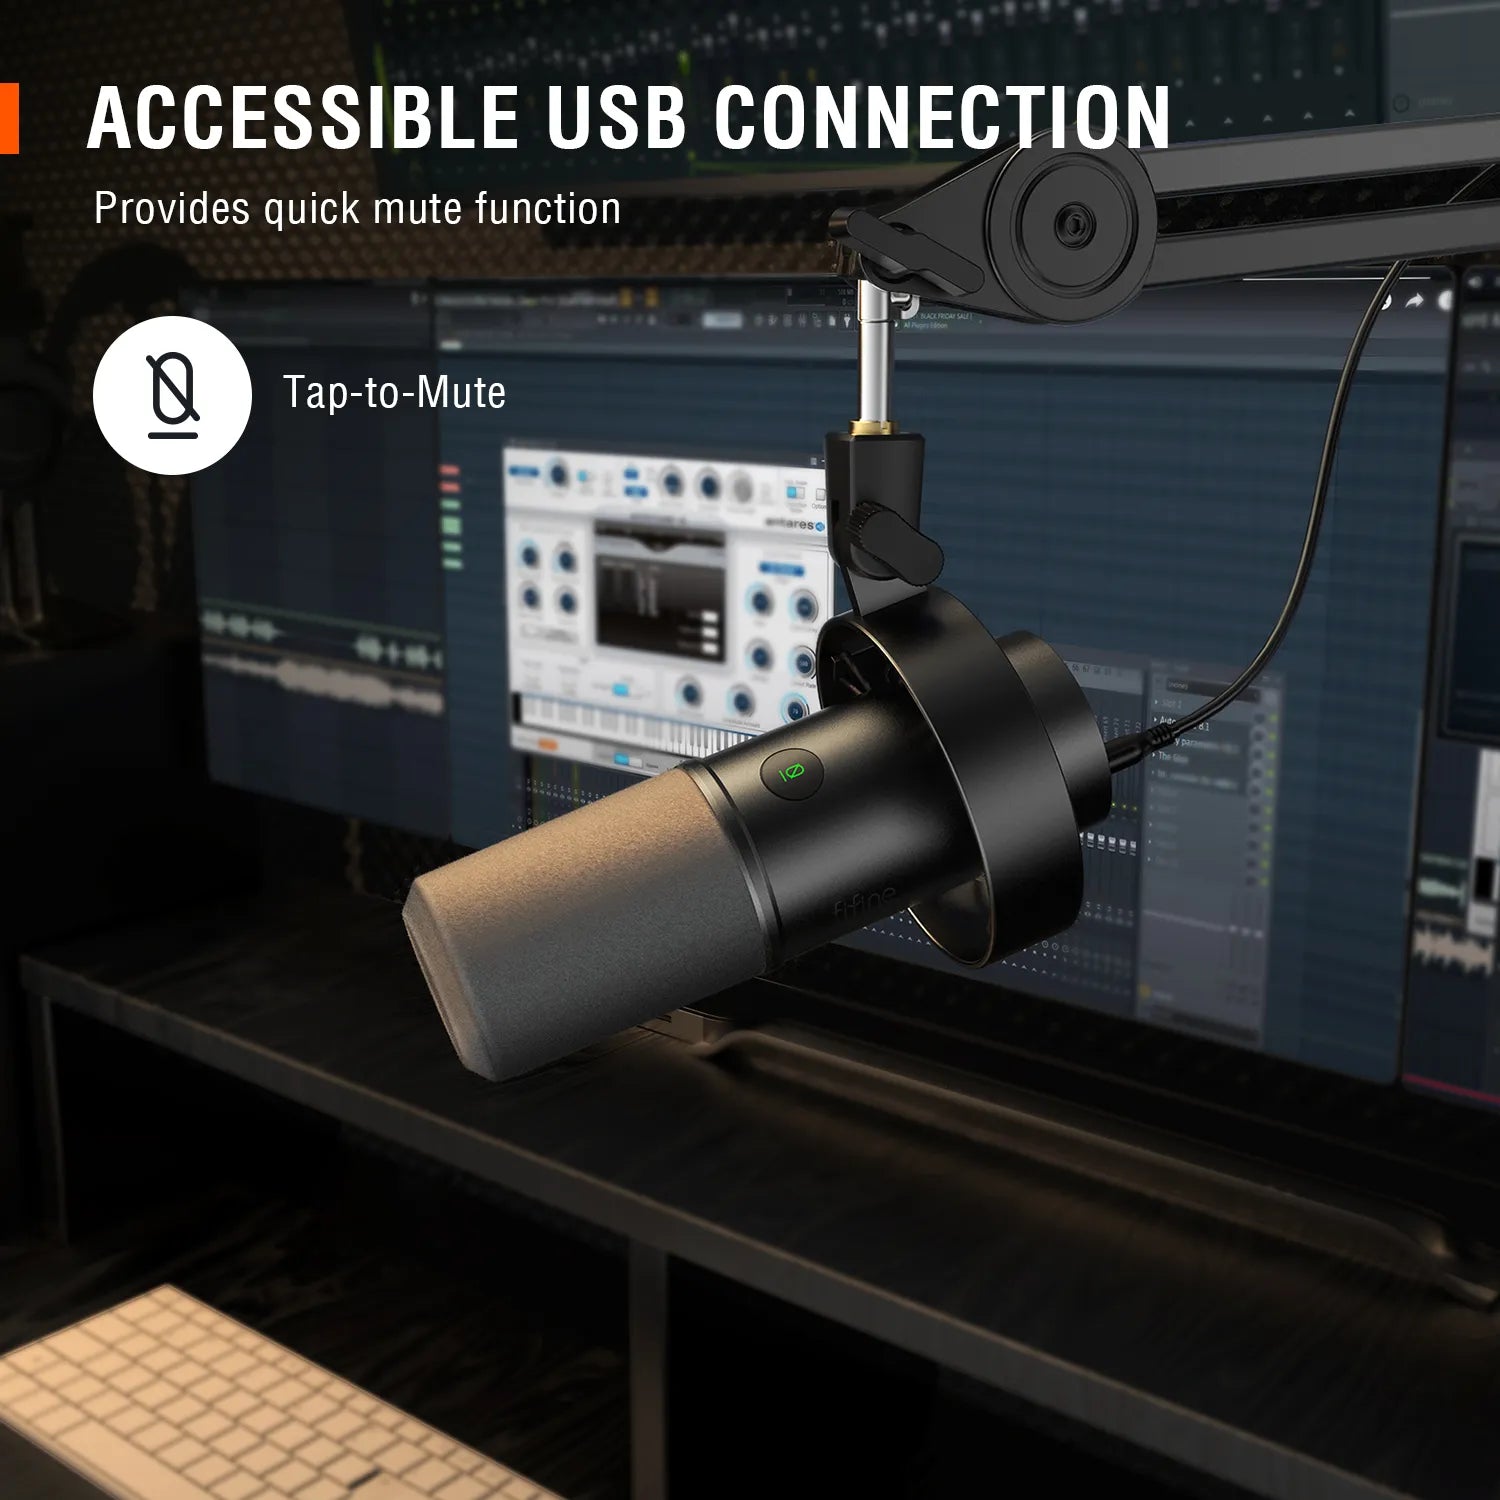 FIFINE USB/XLR Dynamic Microphone with Shock Mount,Touch-mute,headphone jack&Volume Control,for PC or Sound Card Recording -K688